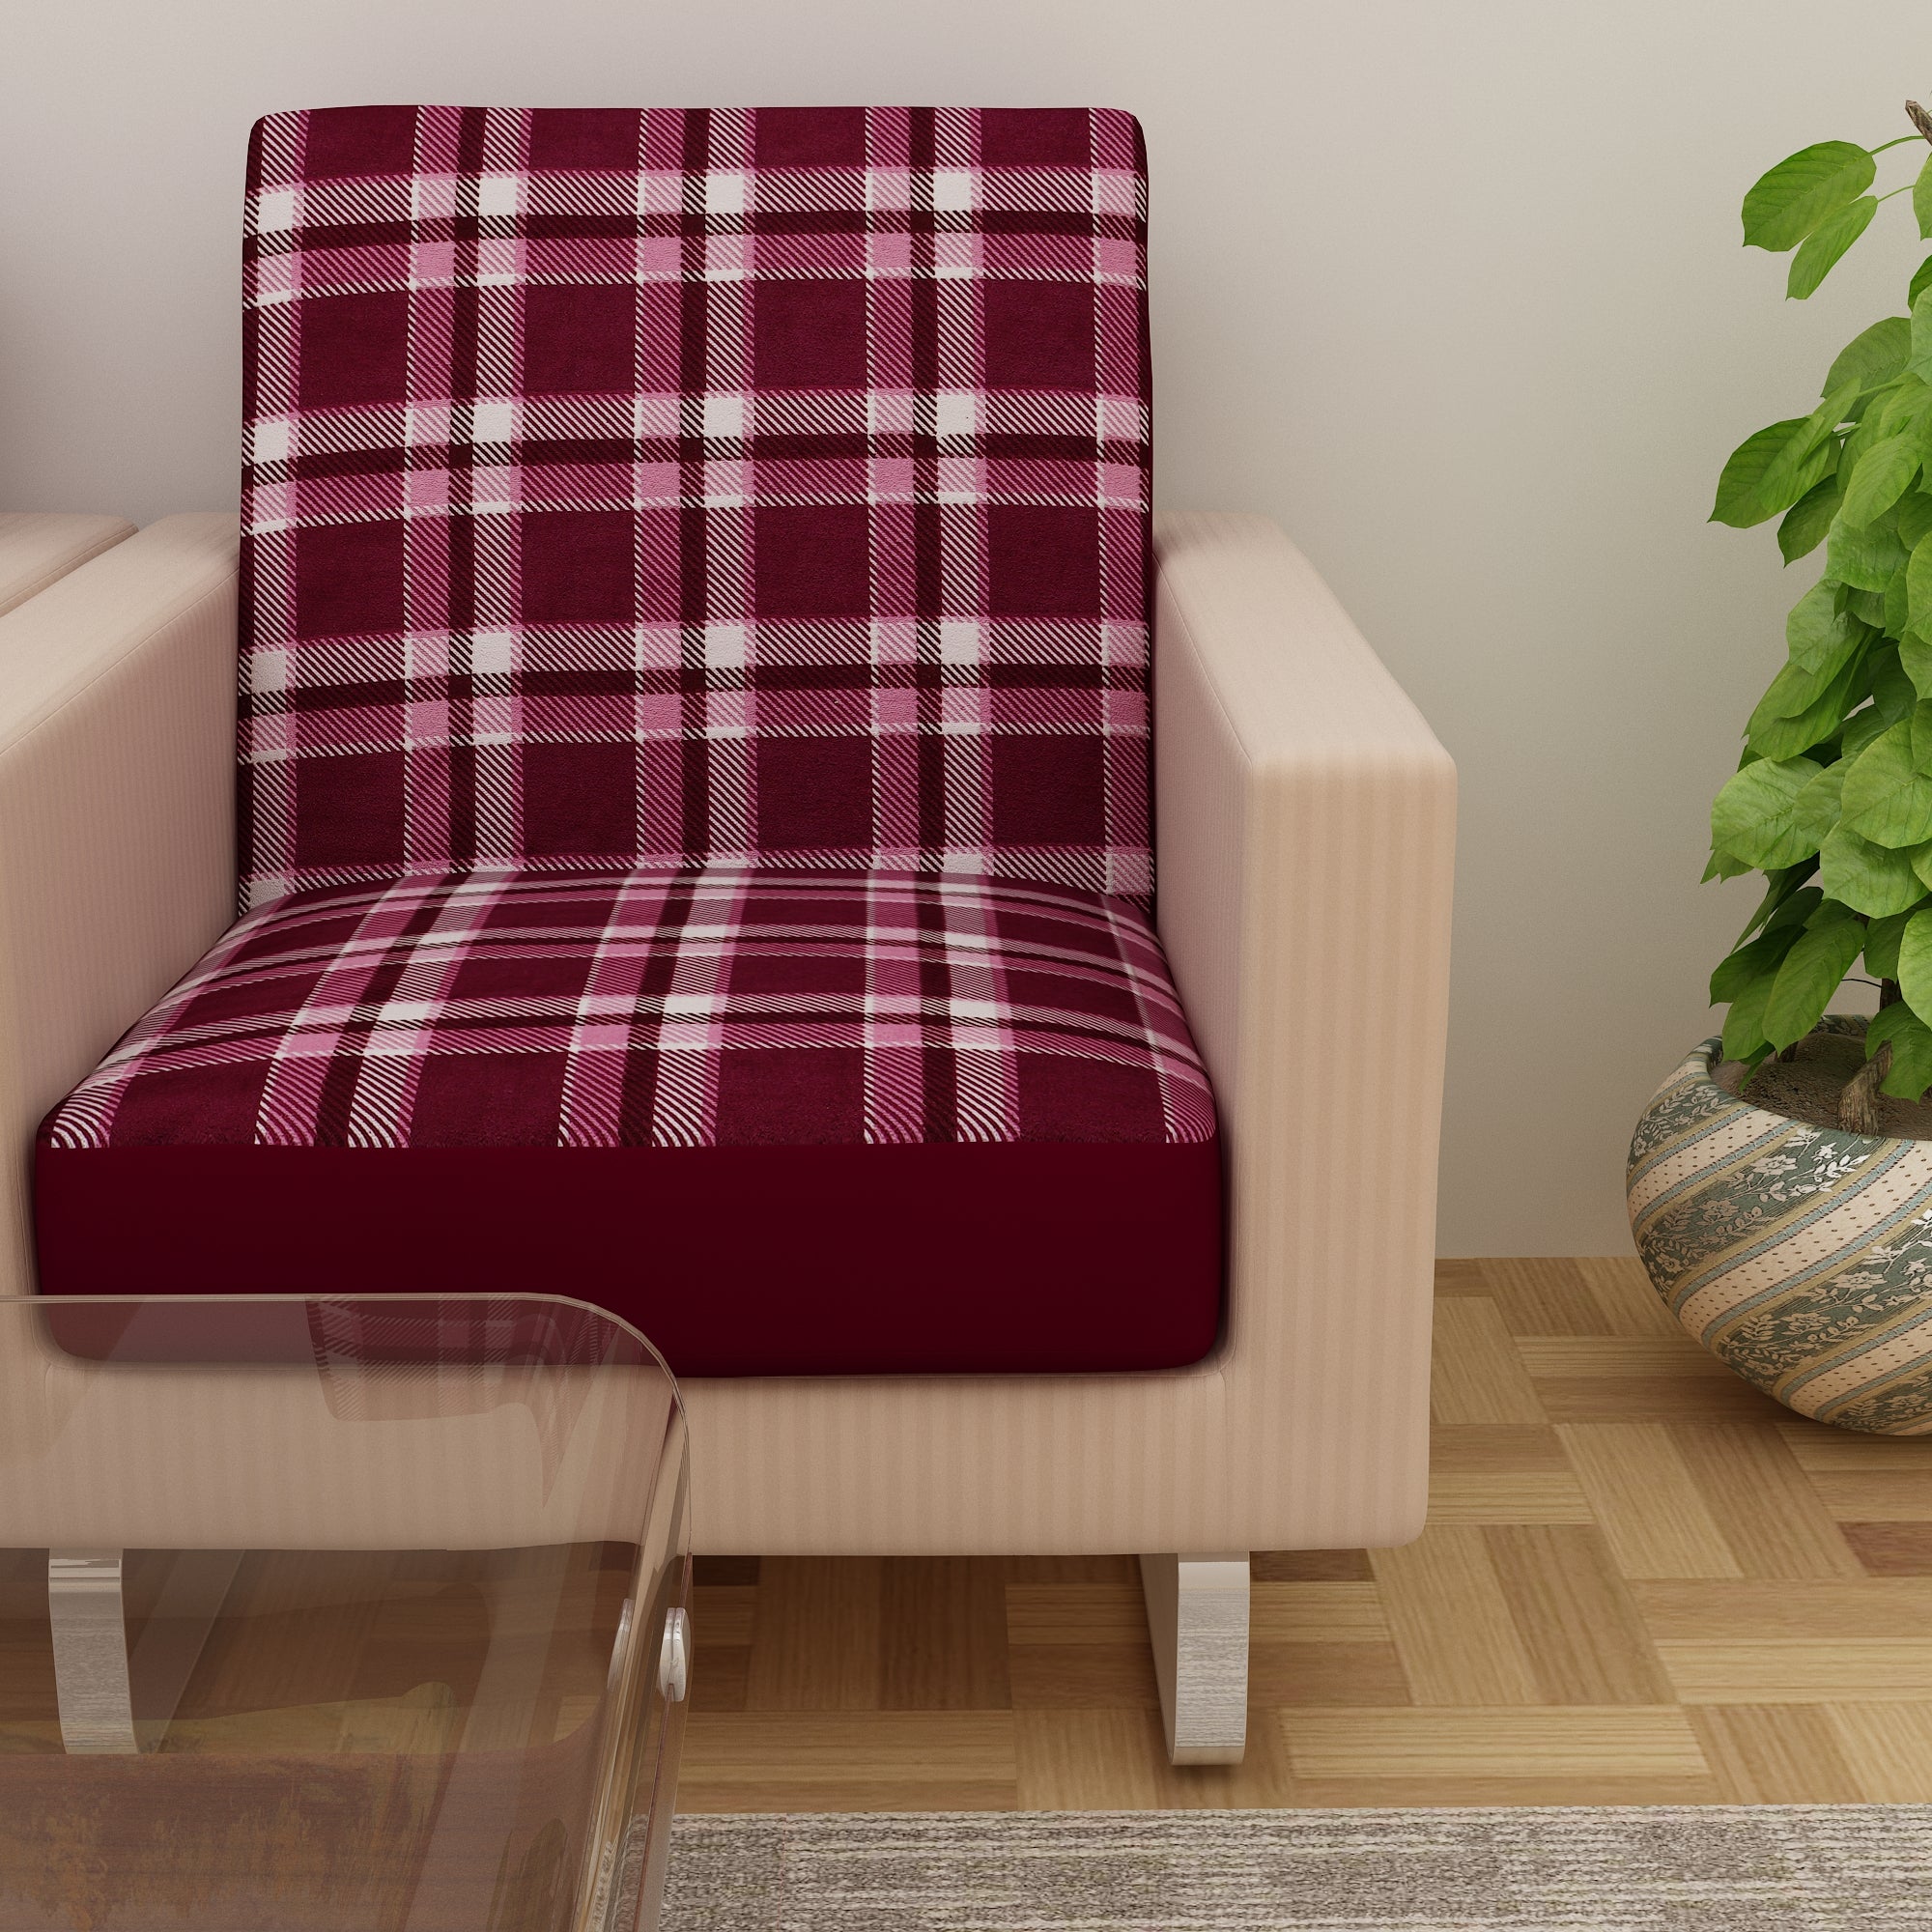 Waterproof Printed Sofa Seat Protector Cover with Stretchable Elastic, Maroon - Dream Care Furnishings Private Limited